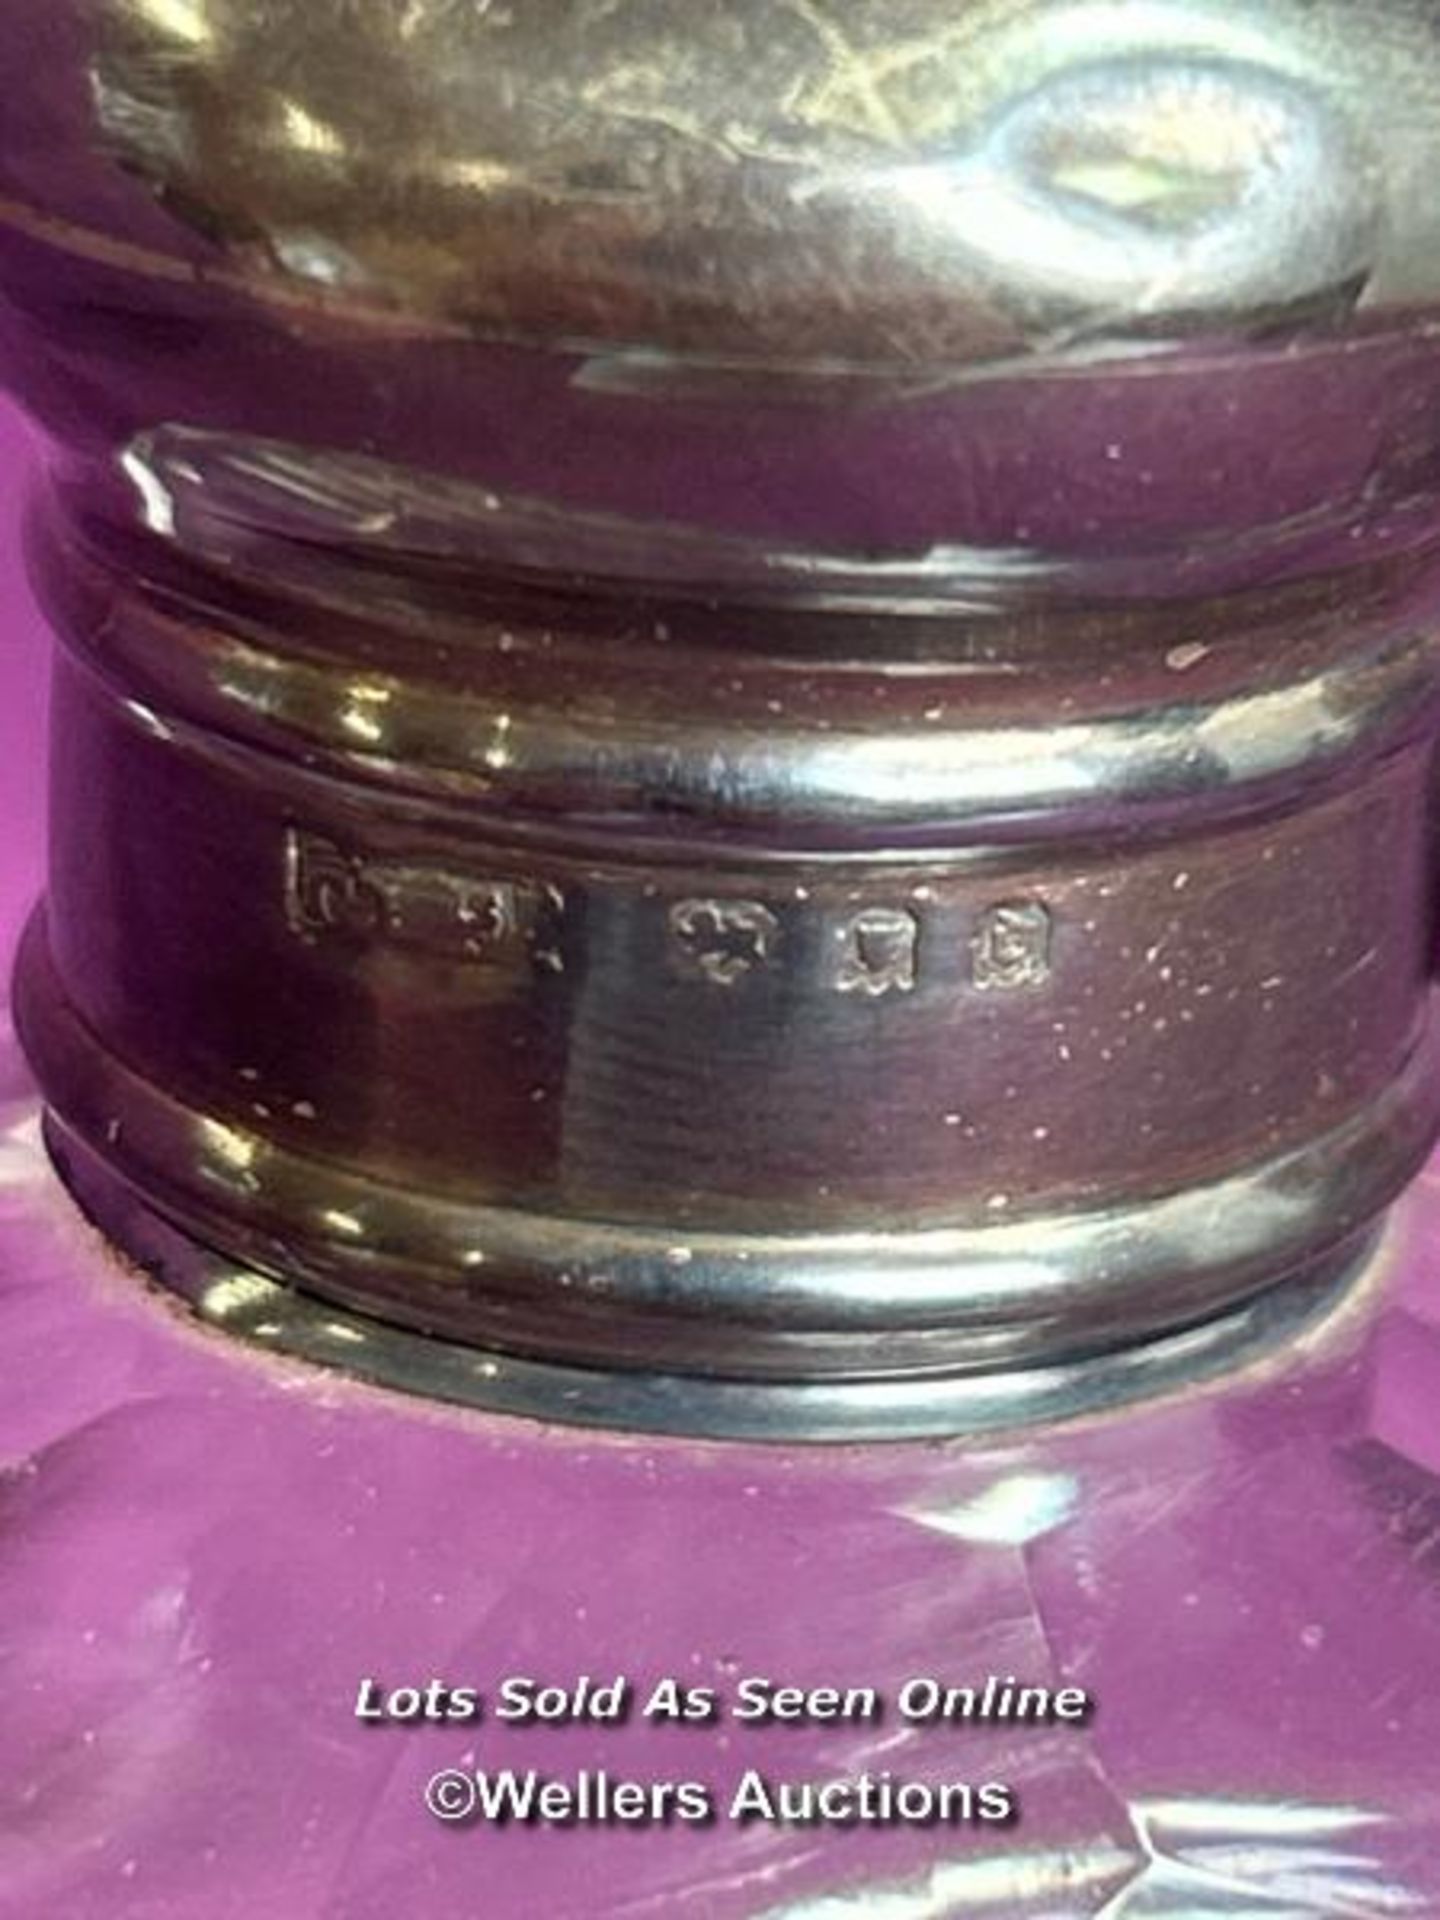 TWO HALLMARKED SILVER TOPPED AND CUT GLASS BEVELLED JARS, TALLEST 9CM, TOTAL SILVER WEIGHT 44GMS - Image 2 of 3